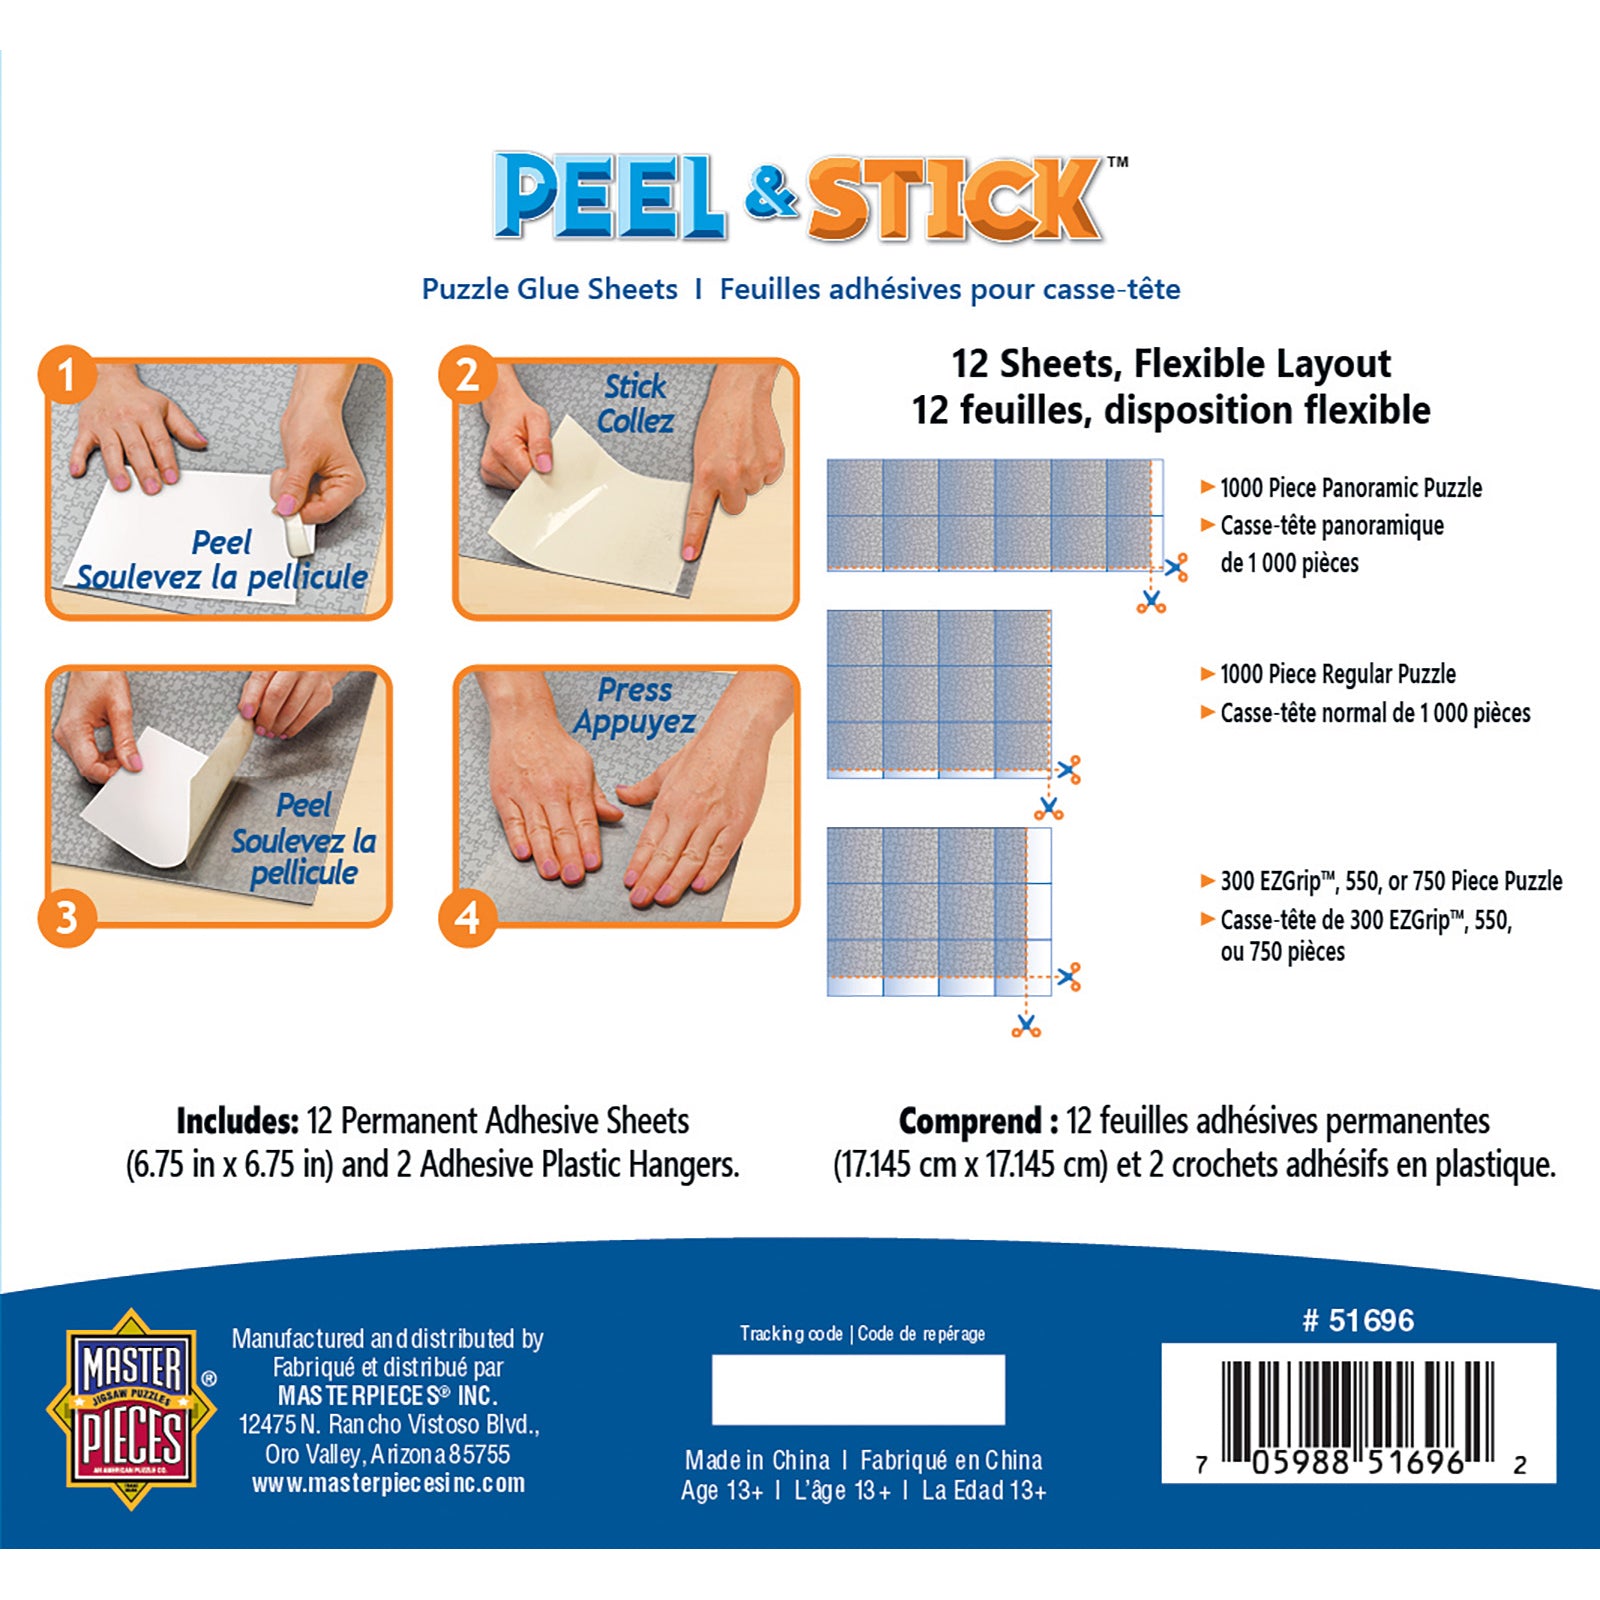 MasterPieces Peel & Stick Puzzle Glue Sheets 51696 – Good's Store